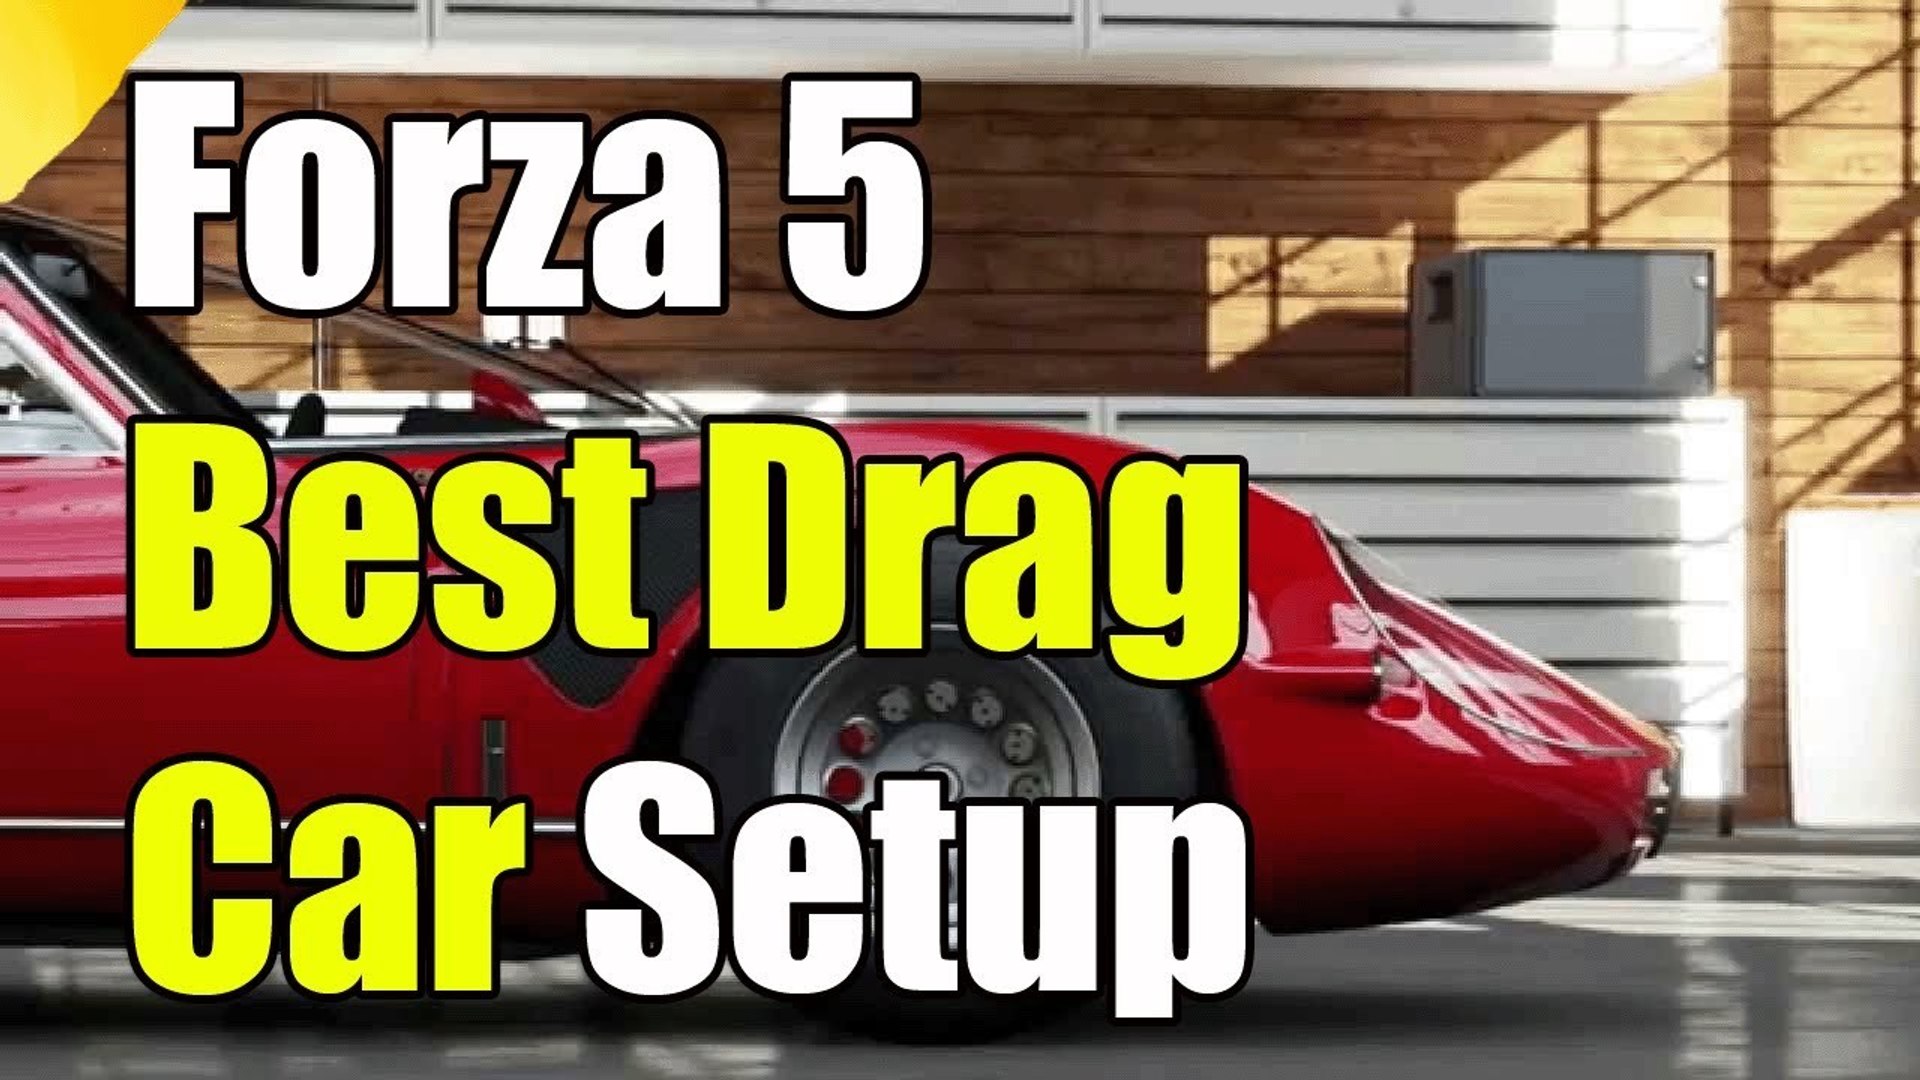 Forza Motorsport 5 Best Drag Car Setup and Tune Forza 5 Best Drag Car Setup  - video Dailymotion